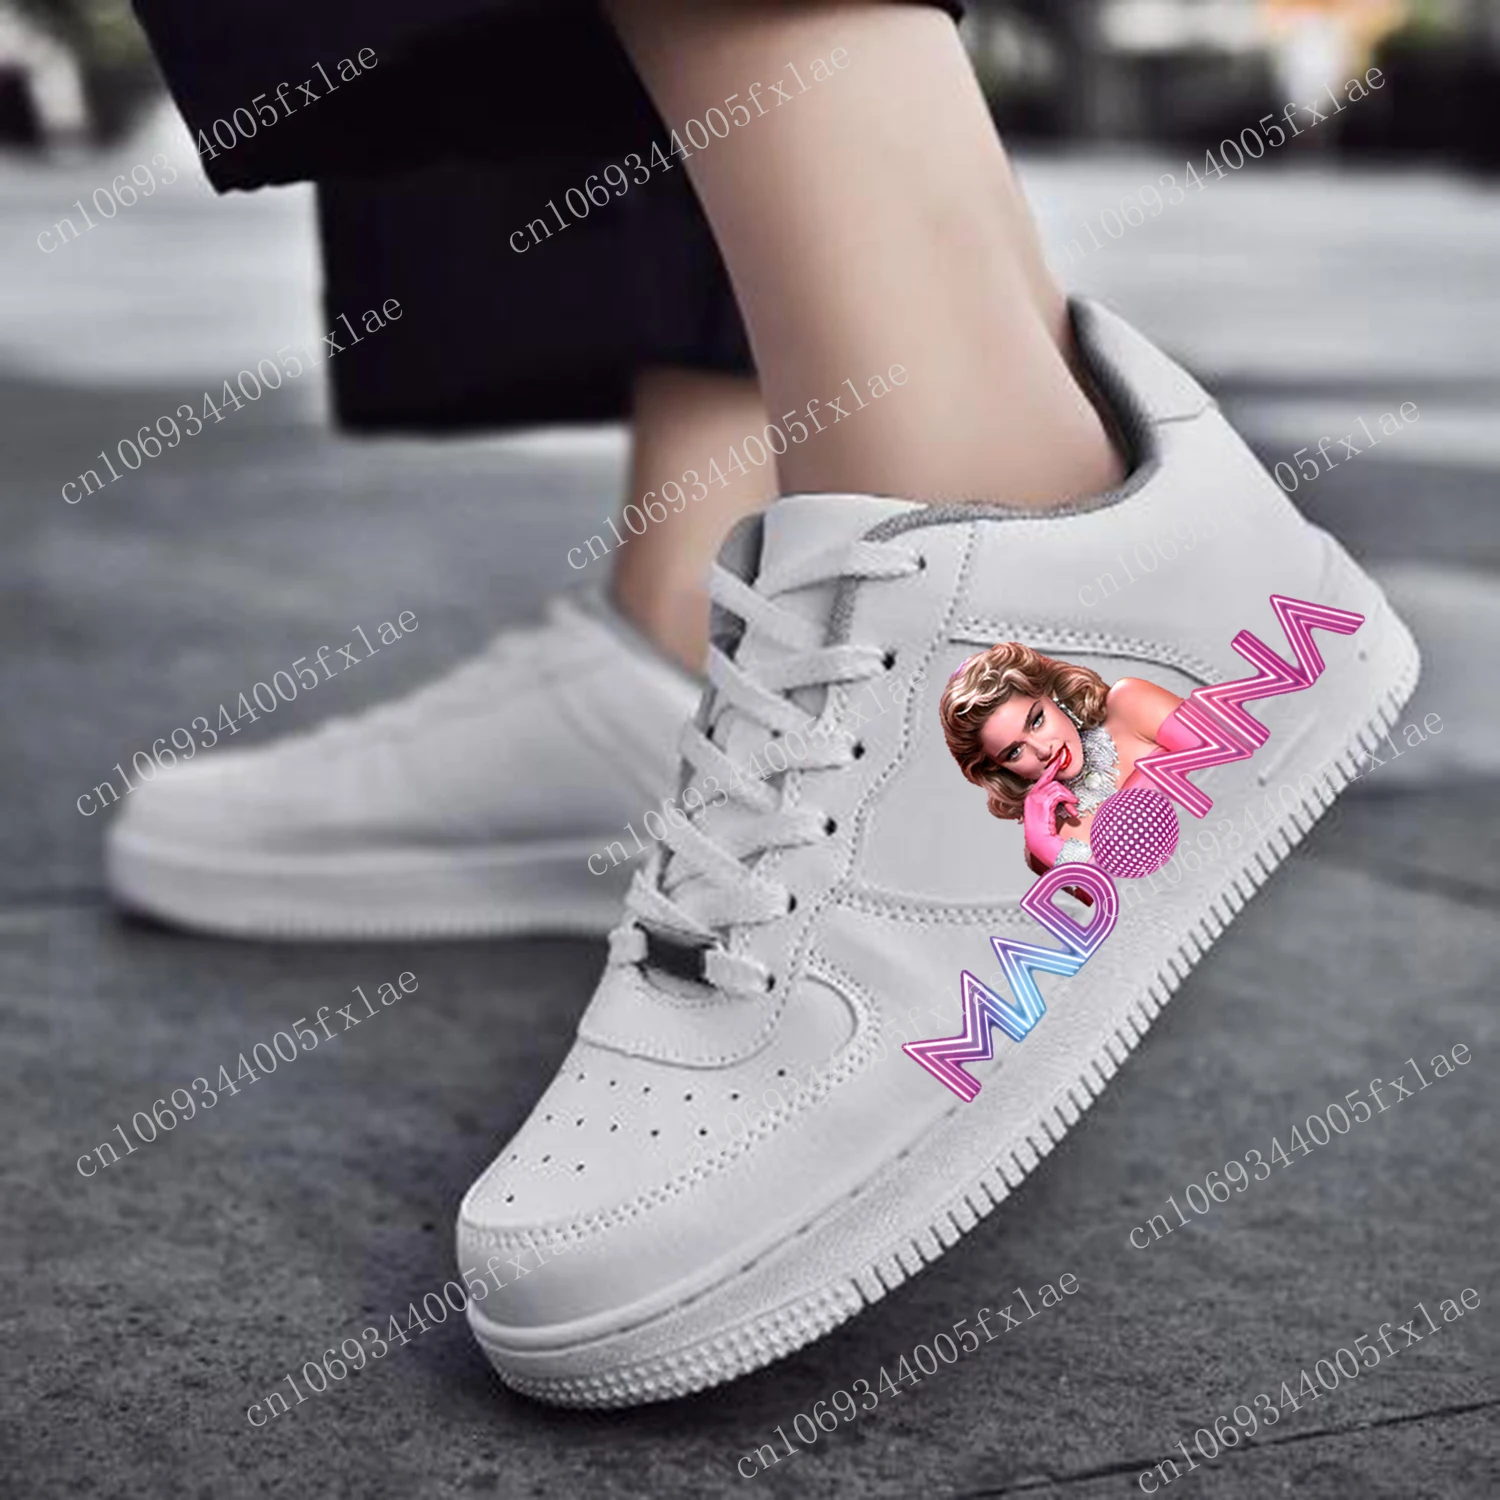 

Madonna AF Basketball Mens Womens Sports Running High Quality Flats Force Sneakers Lace Up Mesh Customized Made Shoe White